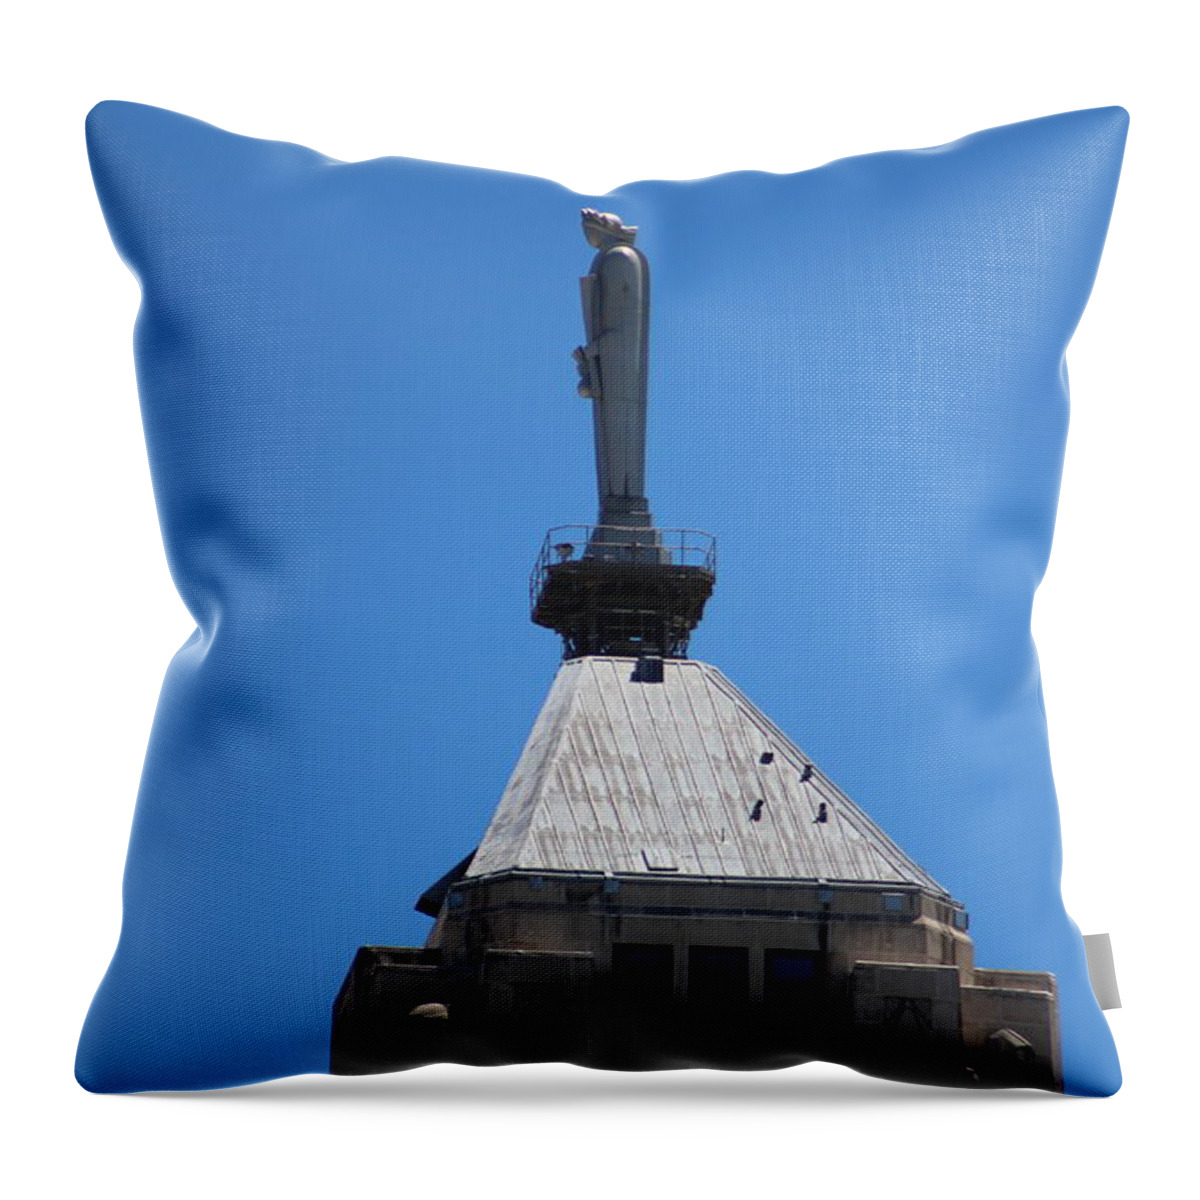 The Watchers Throw Pillow featuring the photograph The Watchers Chicago Illinois Architecture by Colleen Cornelius